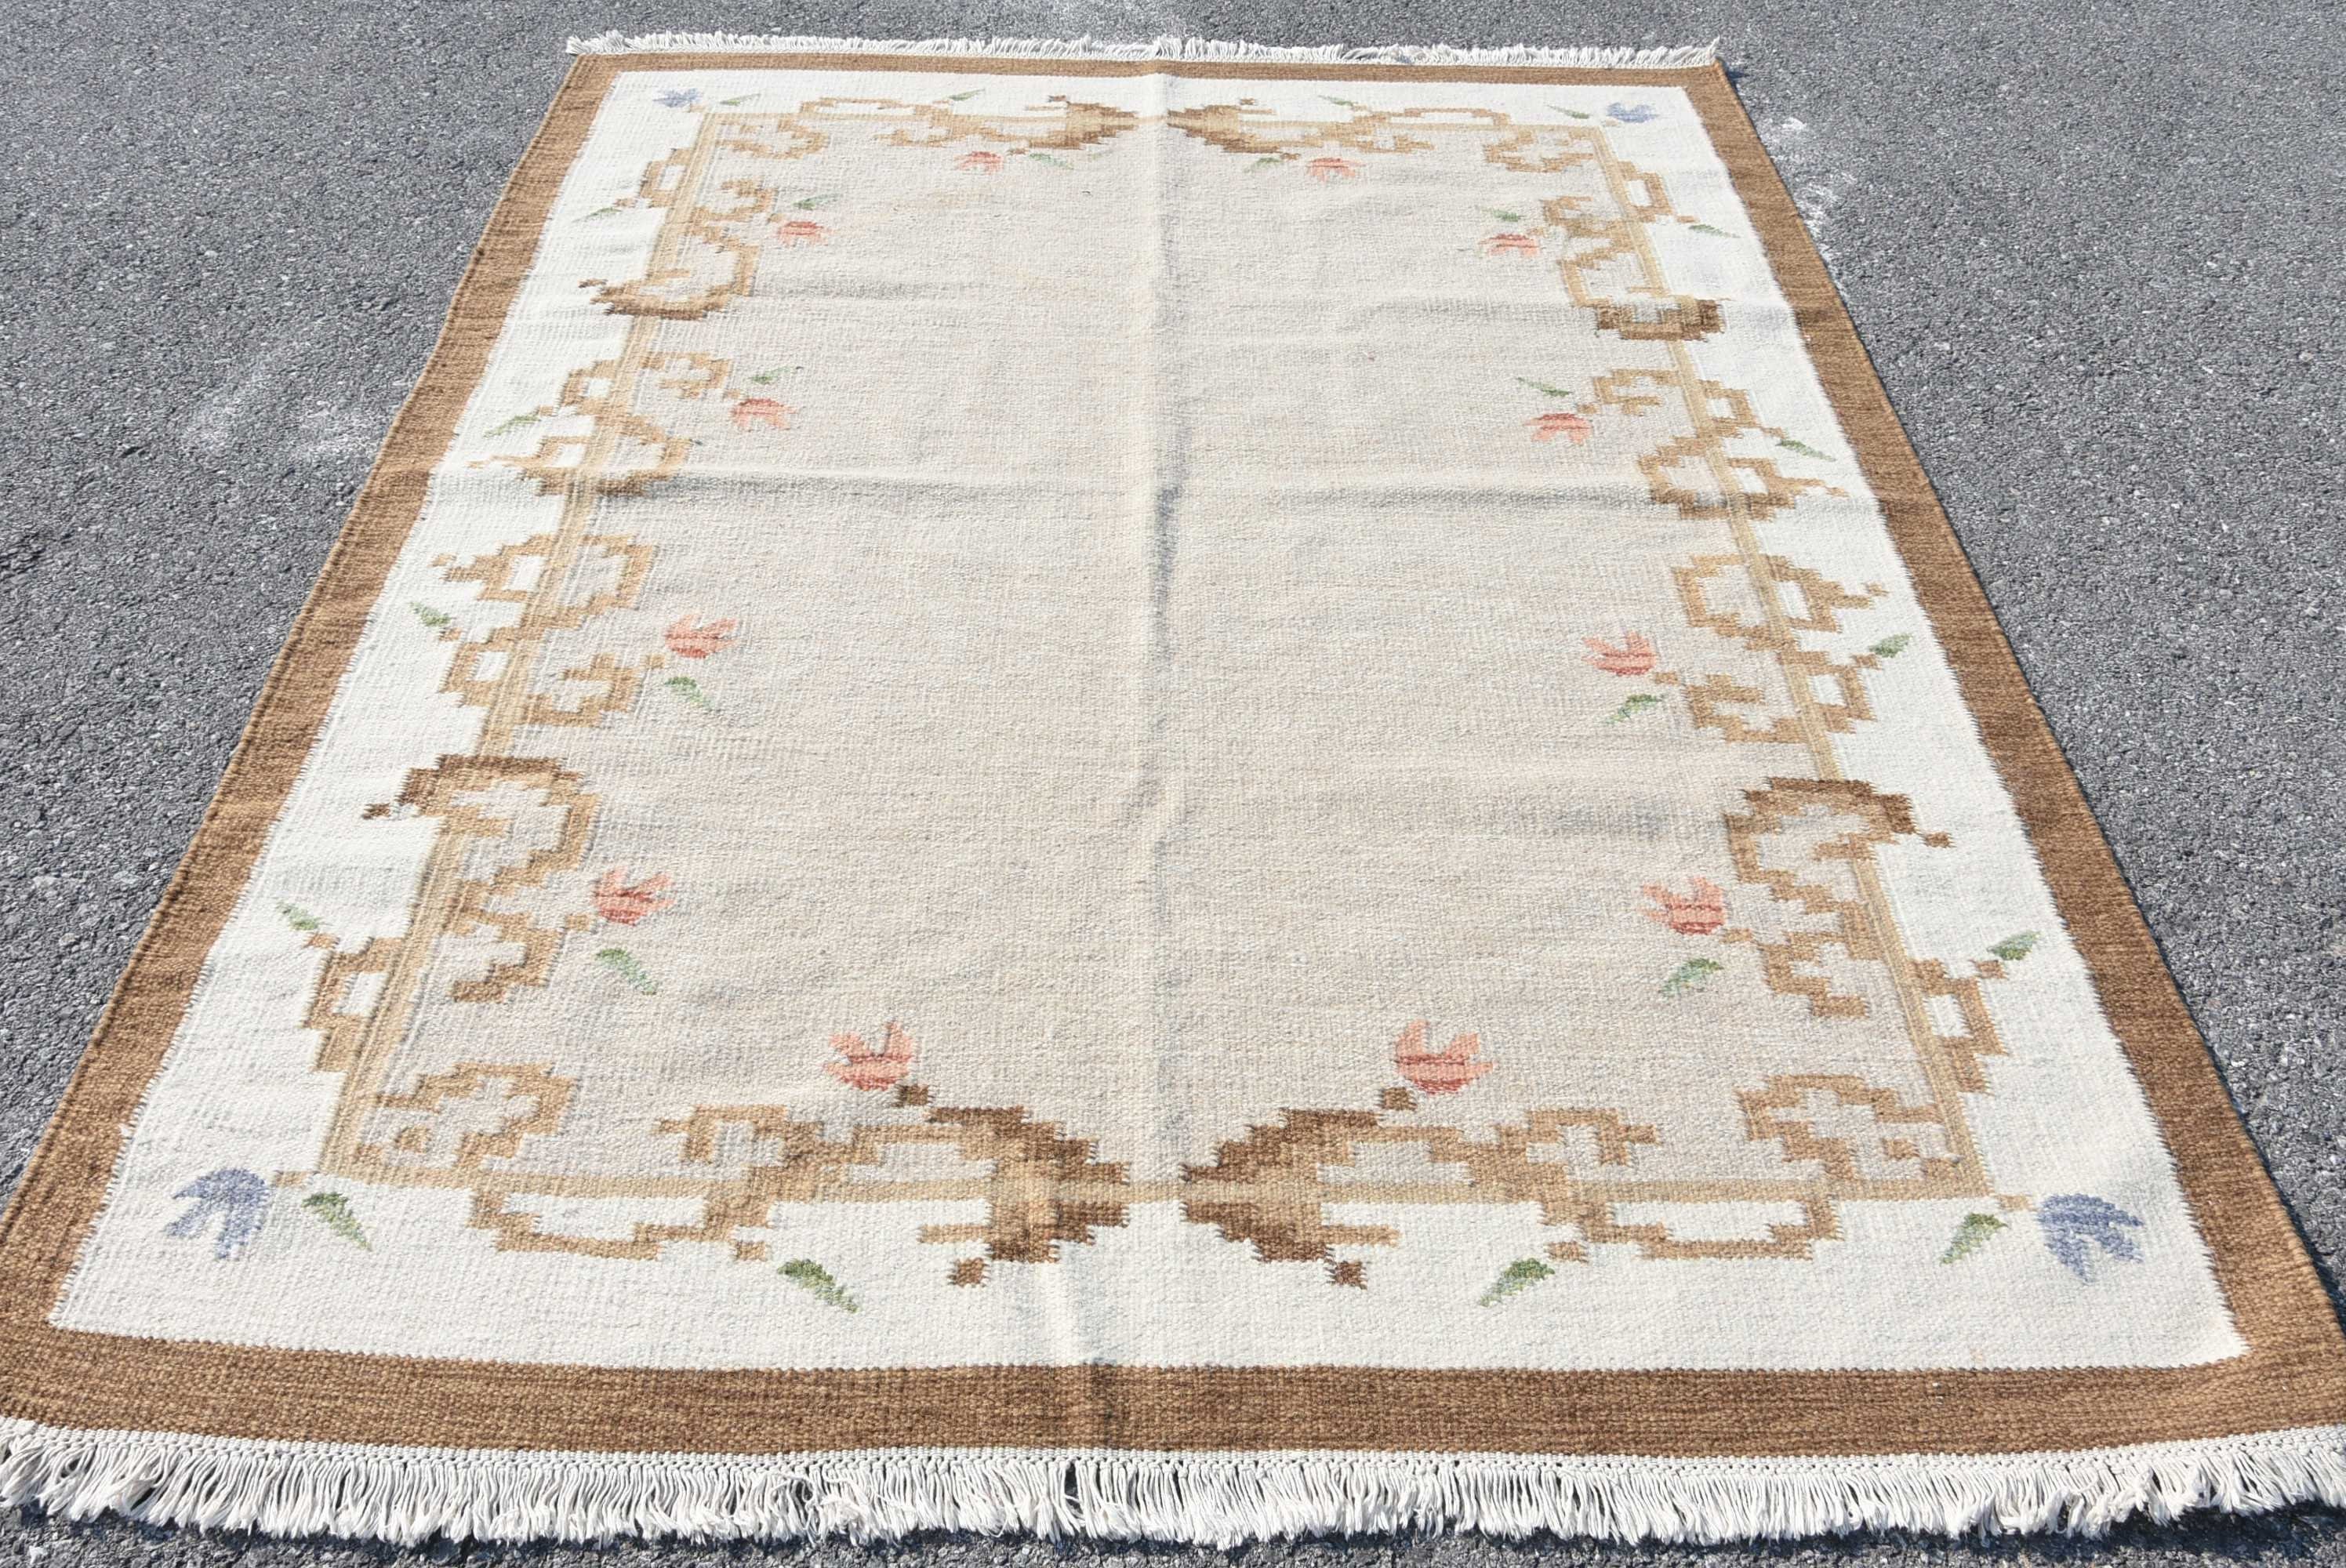 Turkish Rug, Dorm Rug, Moroccan Rugs, 5.8x7.4 ft Large Rug, Vintage Rugs, White Anatolian Rugs, Dining Room Rug, Bedroom Rug, Anatolian Rug